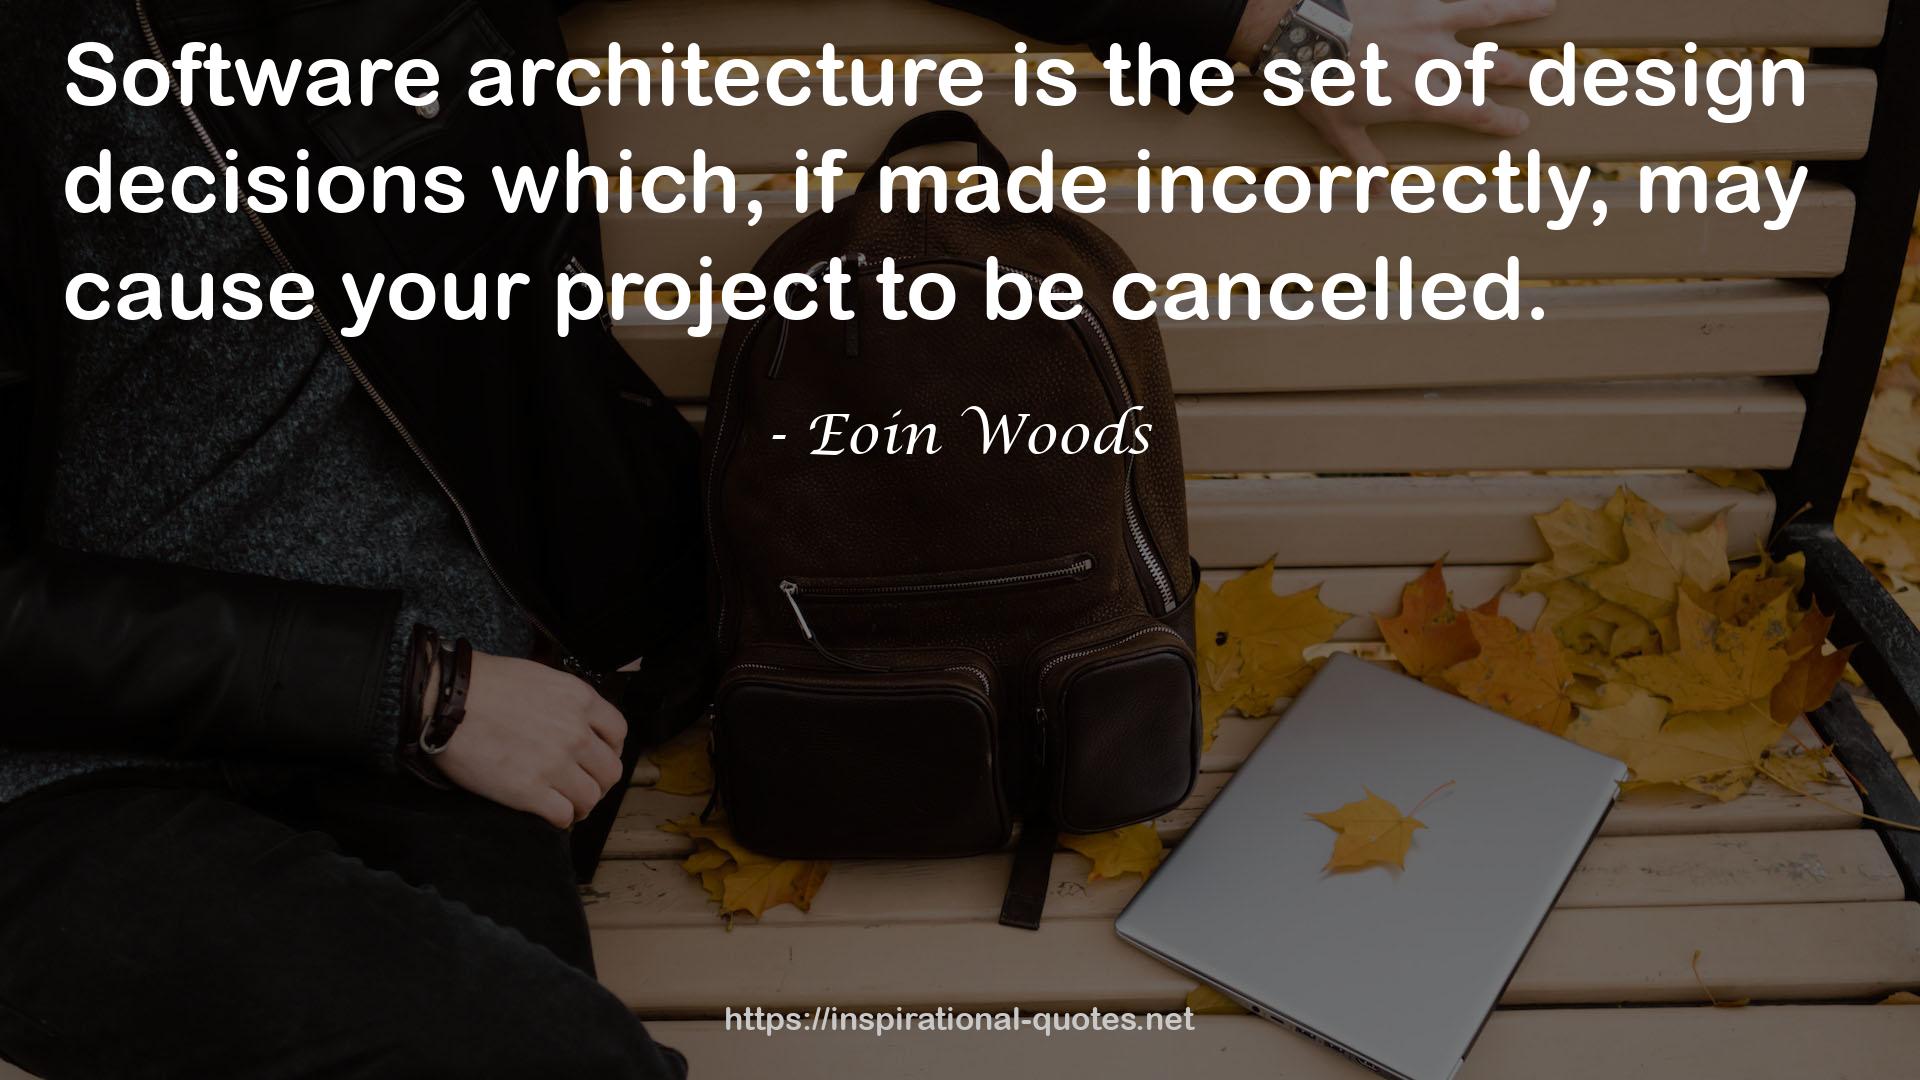 Eoin Woods QUOTES